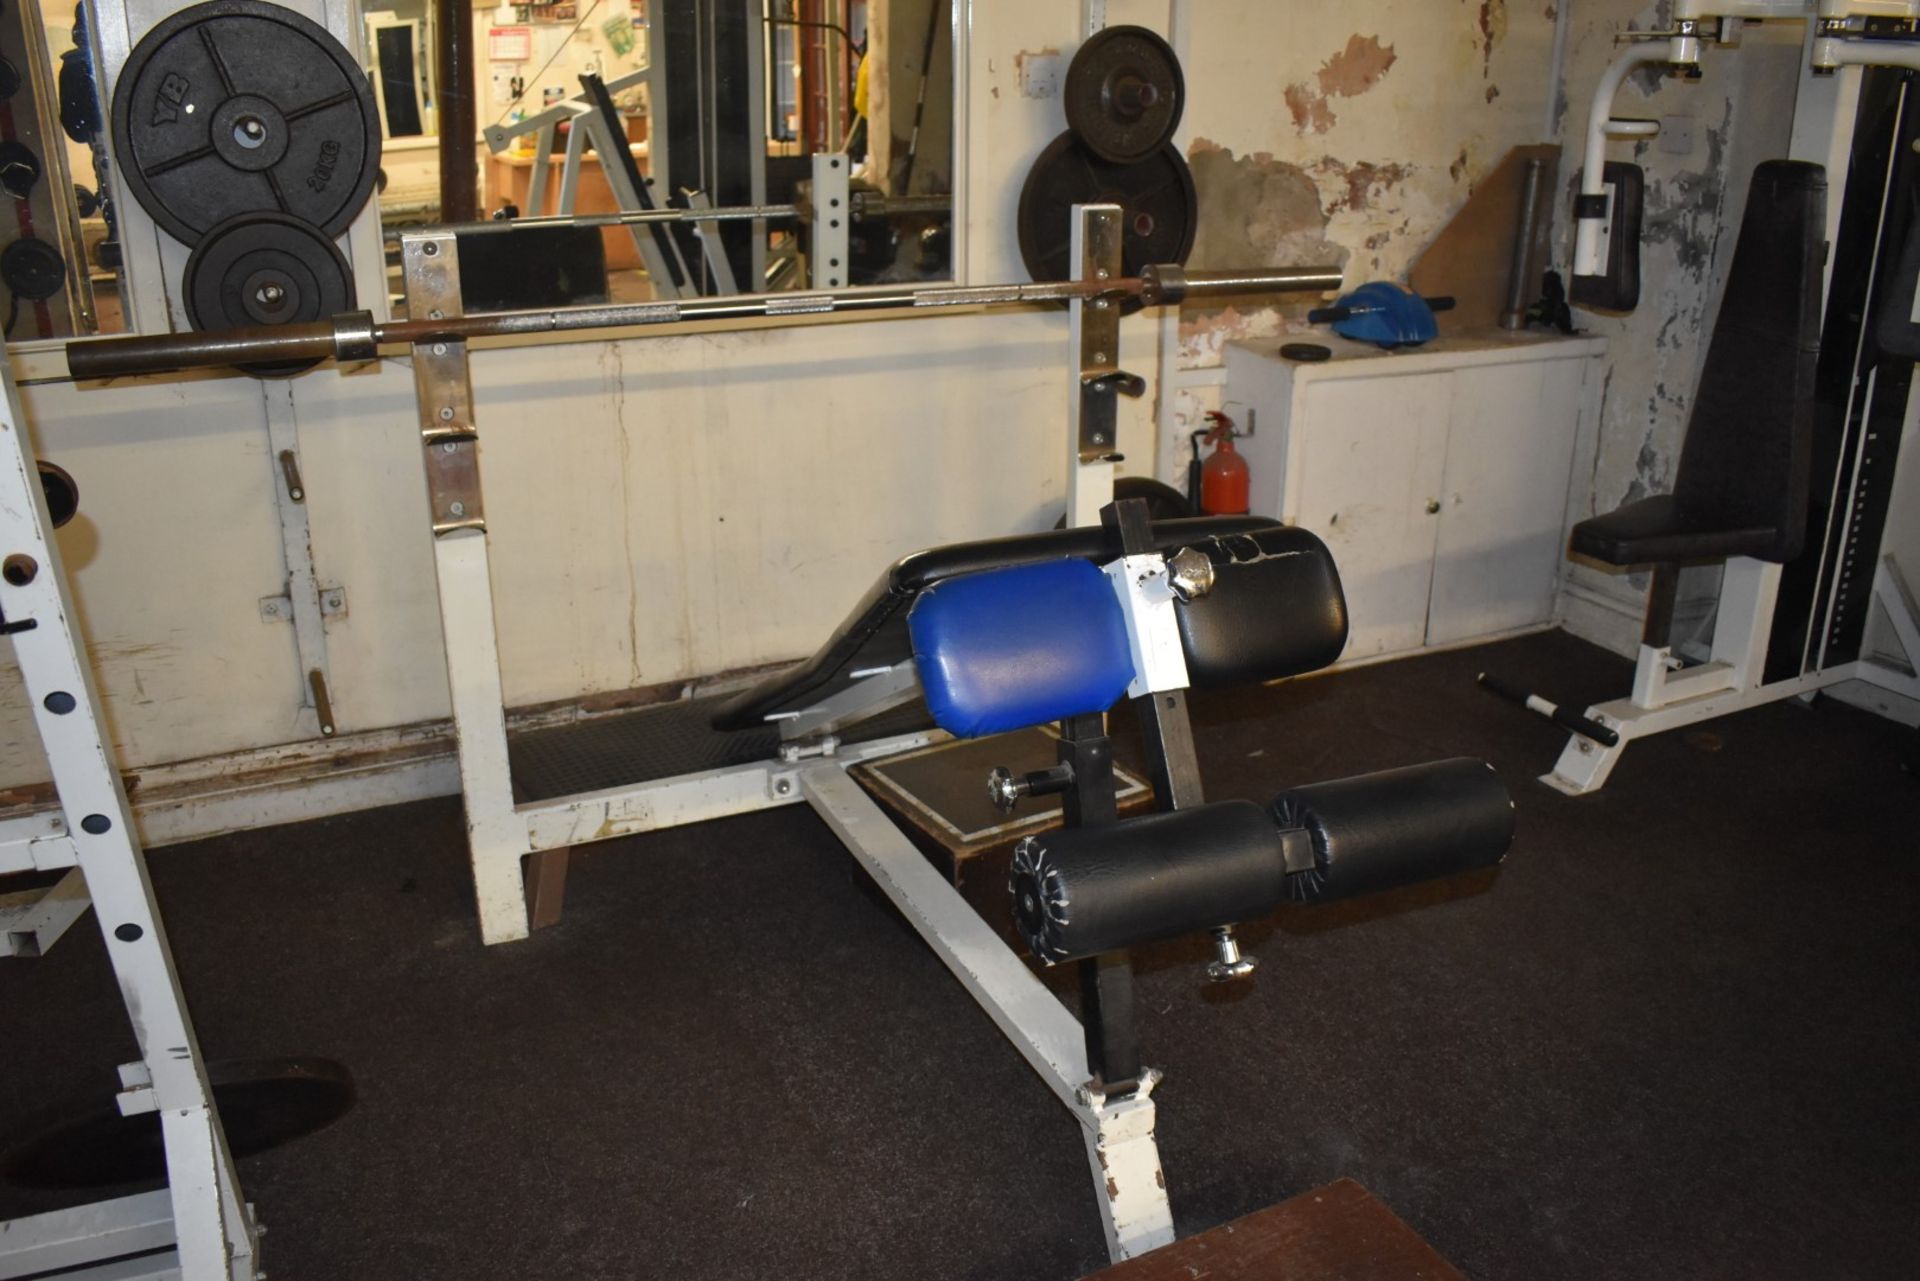 Contents of Bodybuilding and Strongman Gym - Includes Approx 30 Pieces of Gym Equipment, Floor Mats, - Image 14 of 95